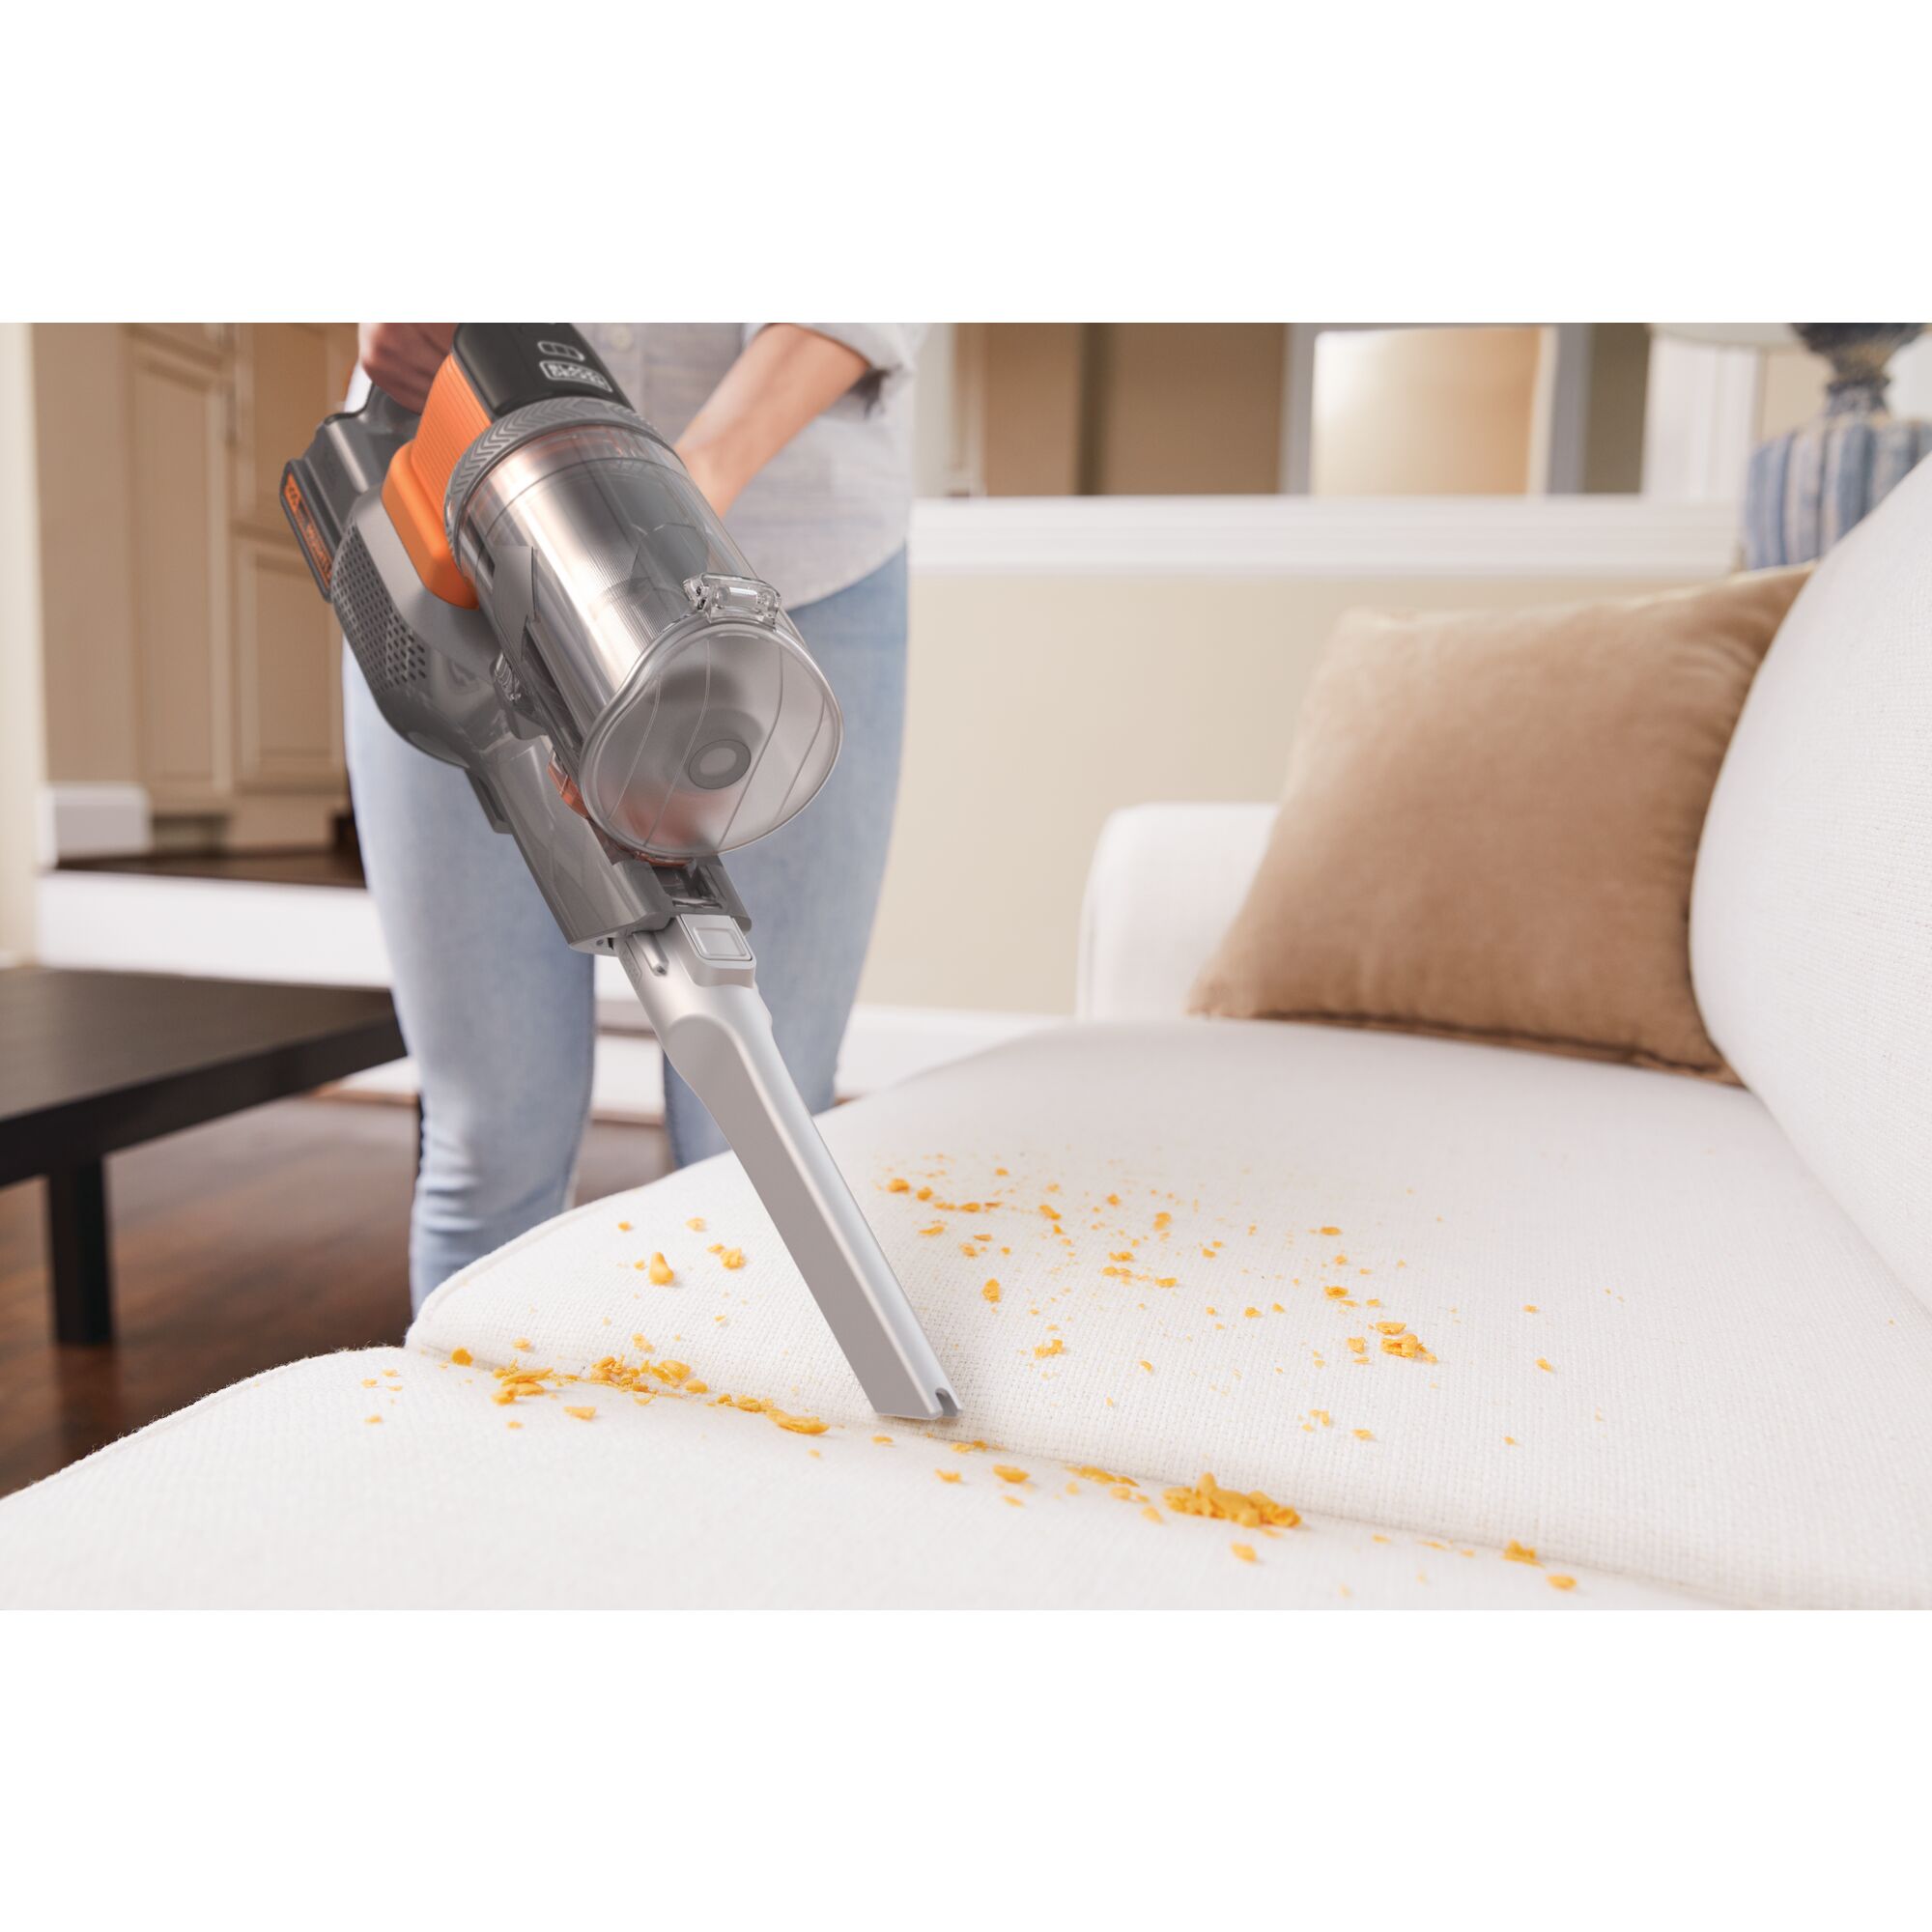 Power Series extreme cordless stick vacuum cleaner cleaning mess from sofa.